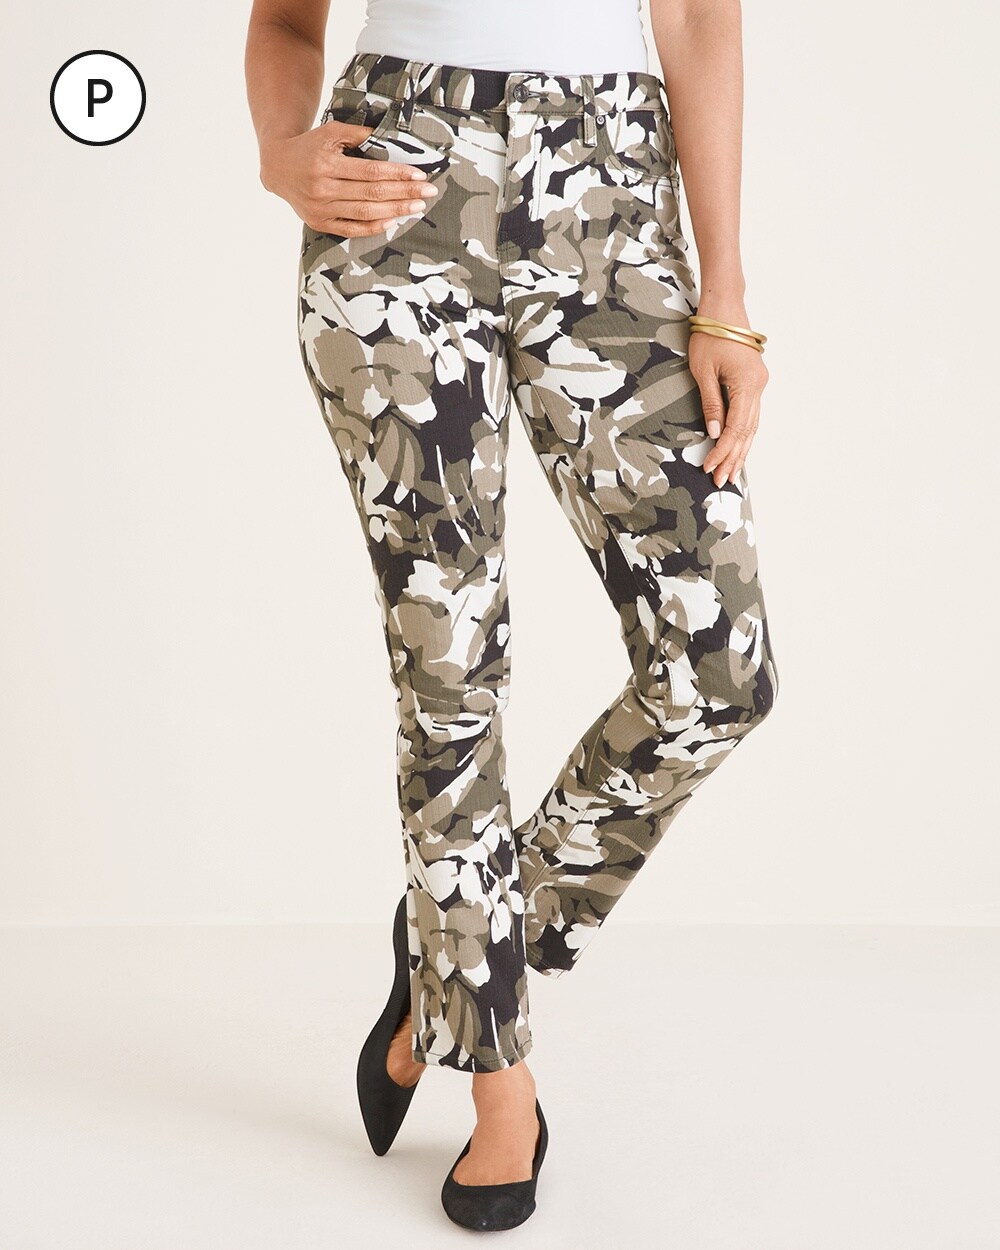 So Slimming Petite Camo-Floral Print Girlfriend Ankle Jeans